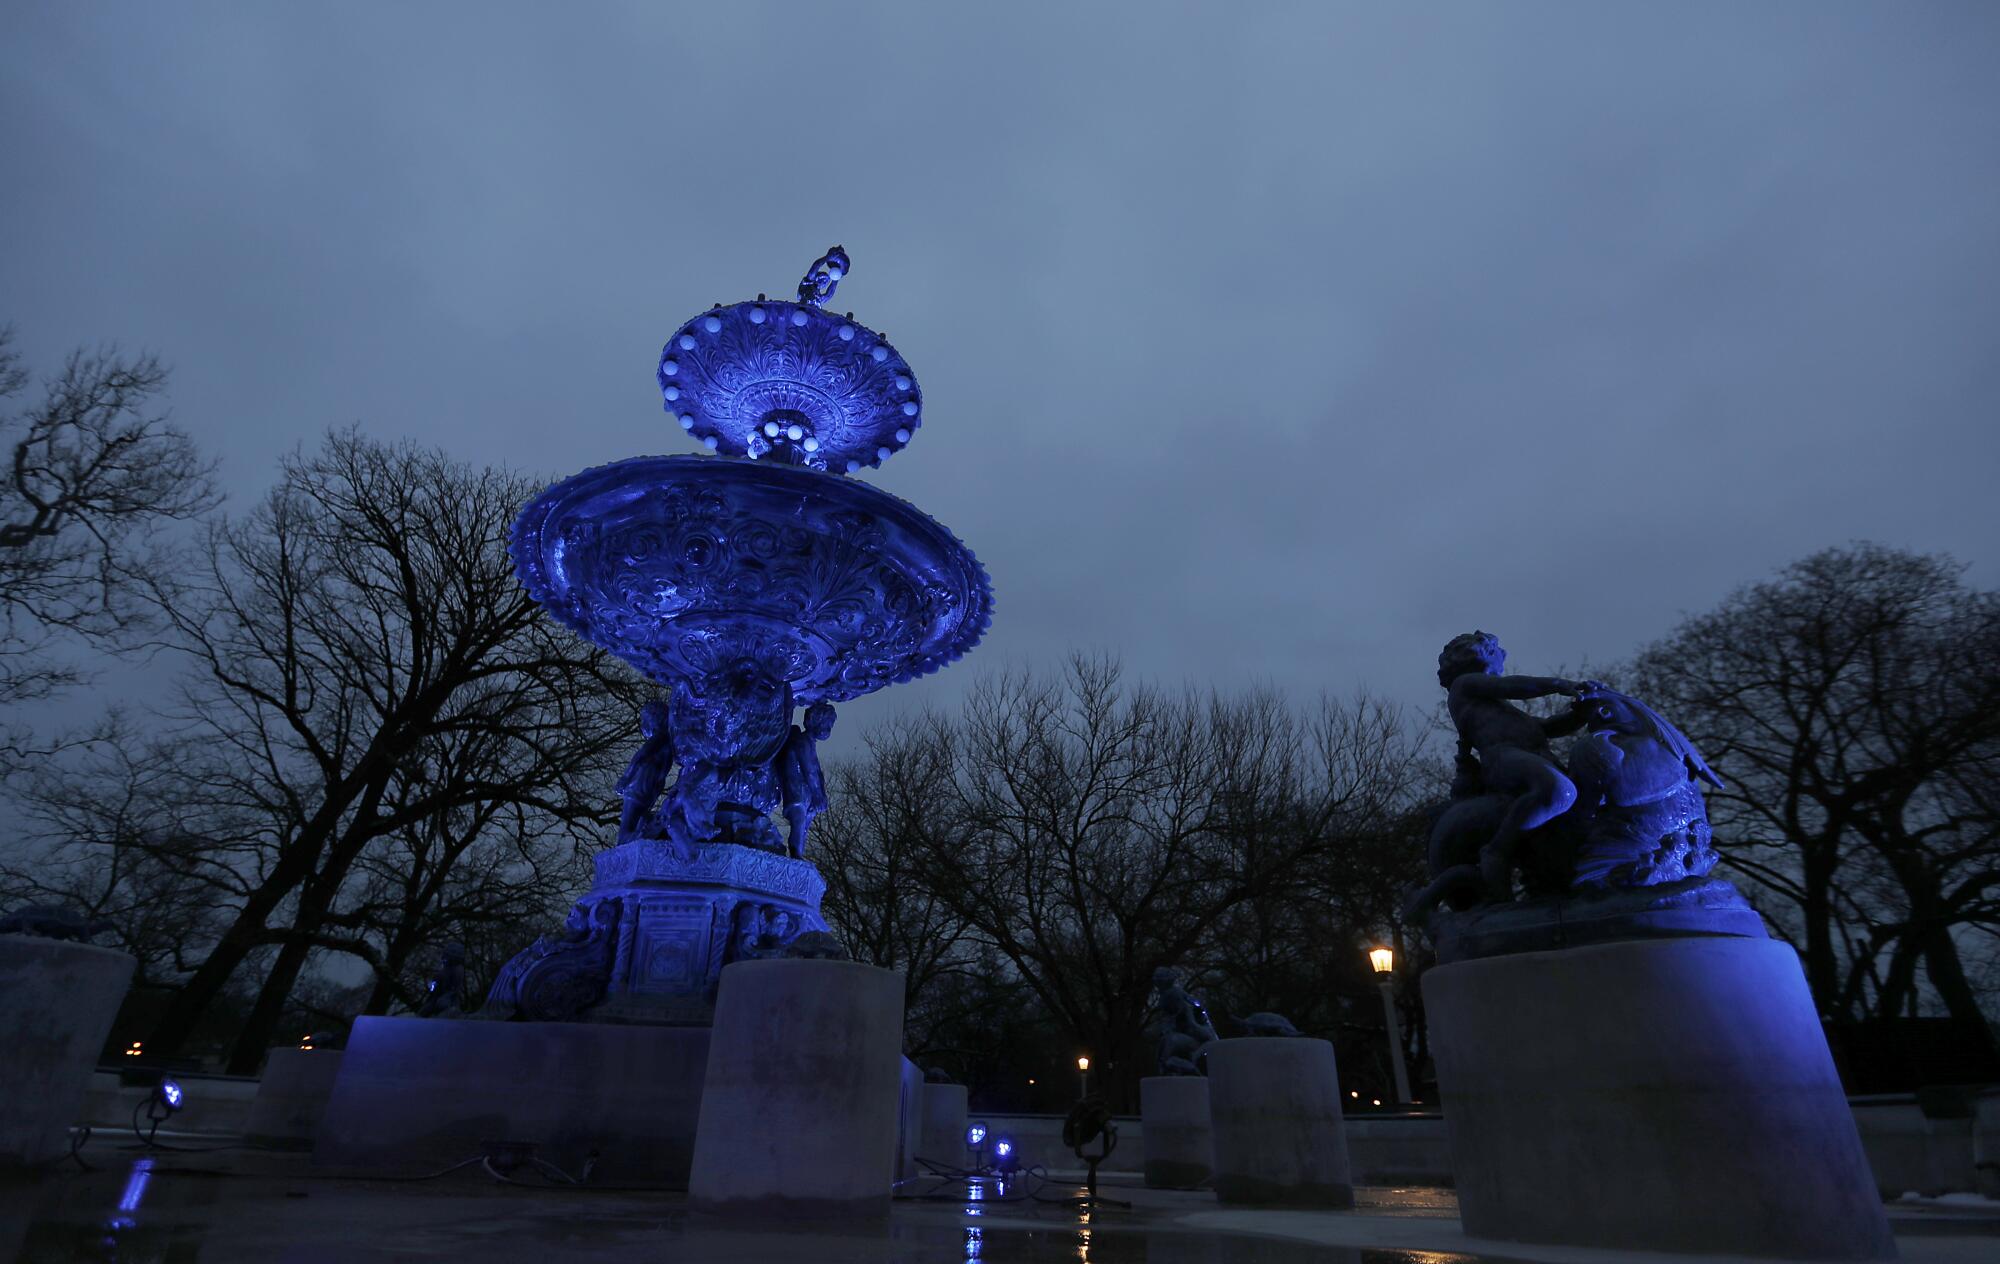 The Studebaker electric fountain stands in the middle of Leeper Park in South Bend, Ind.